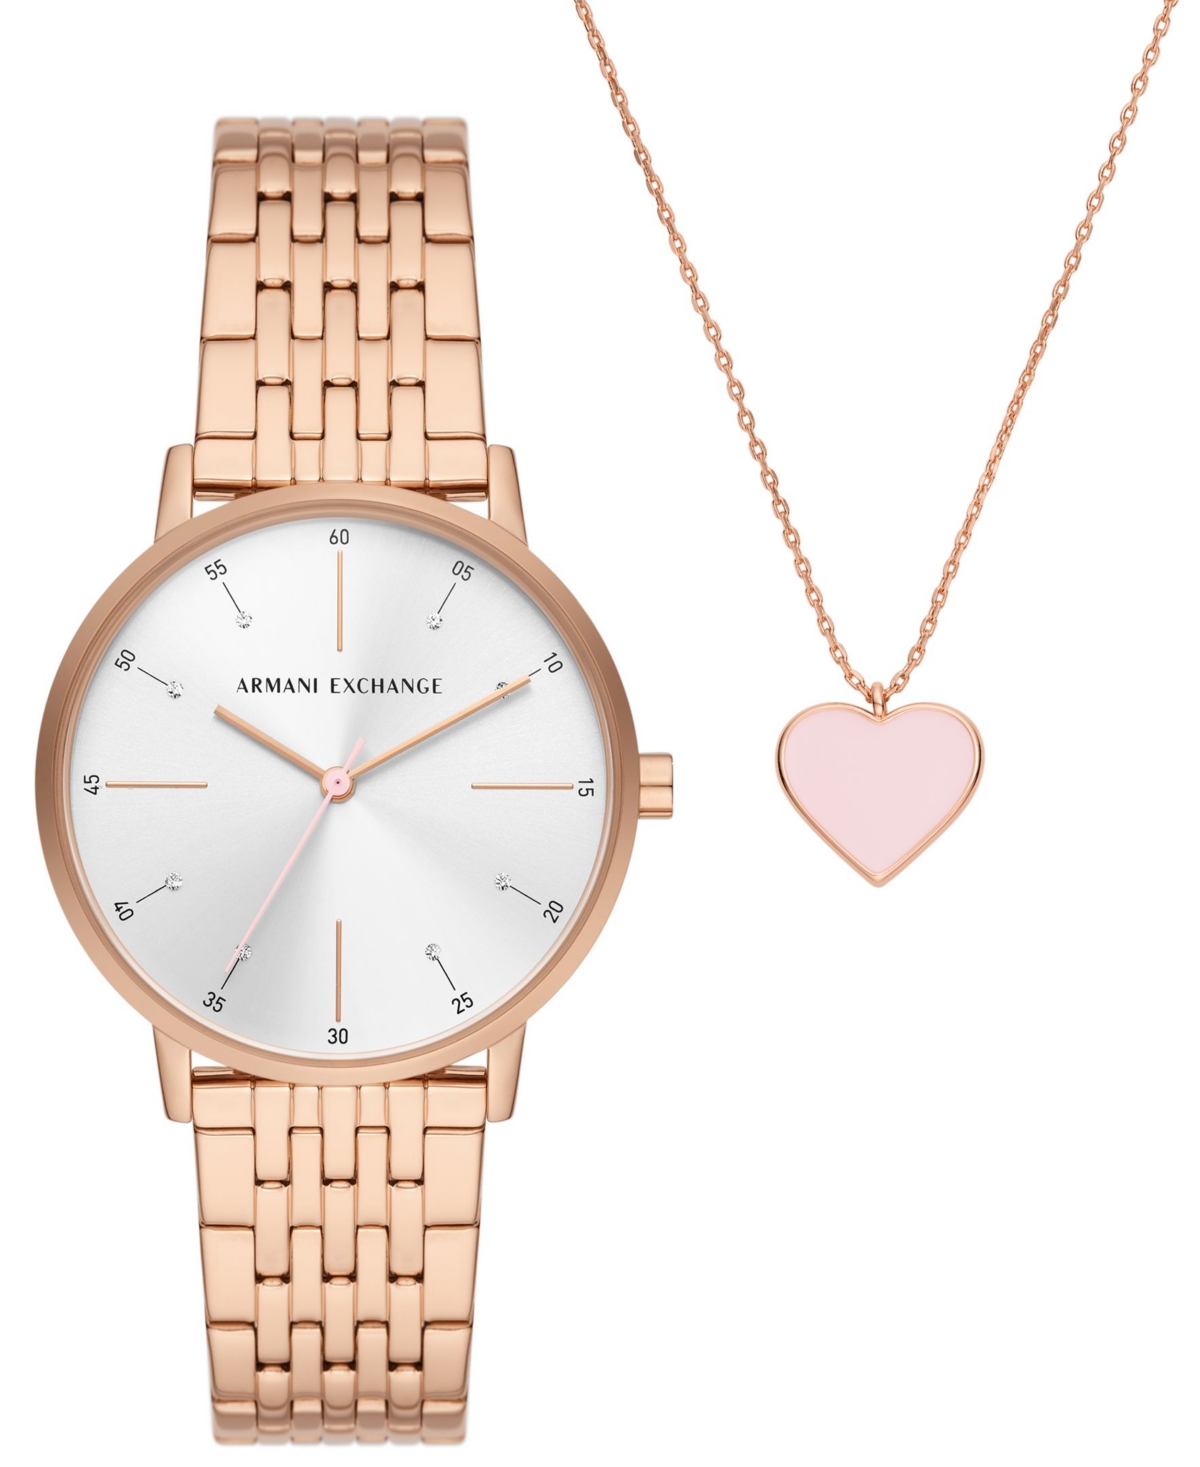 Ax Armani Exchange A X Armani Exchange Women's Three-hand Rose Gold-tone Stainless Steel Bracelet Watch, 36mm And Rose